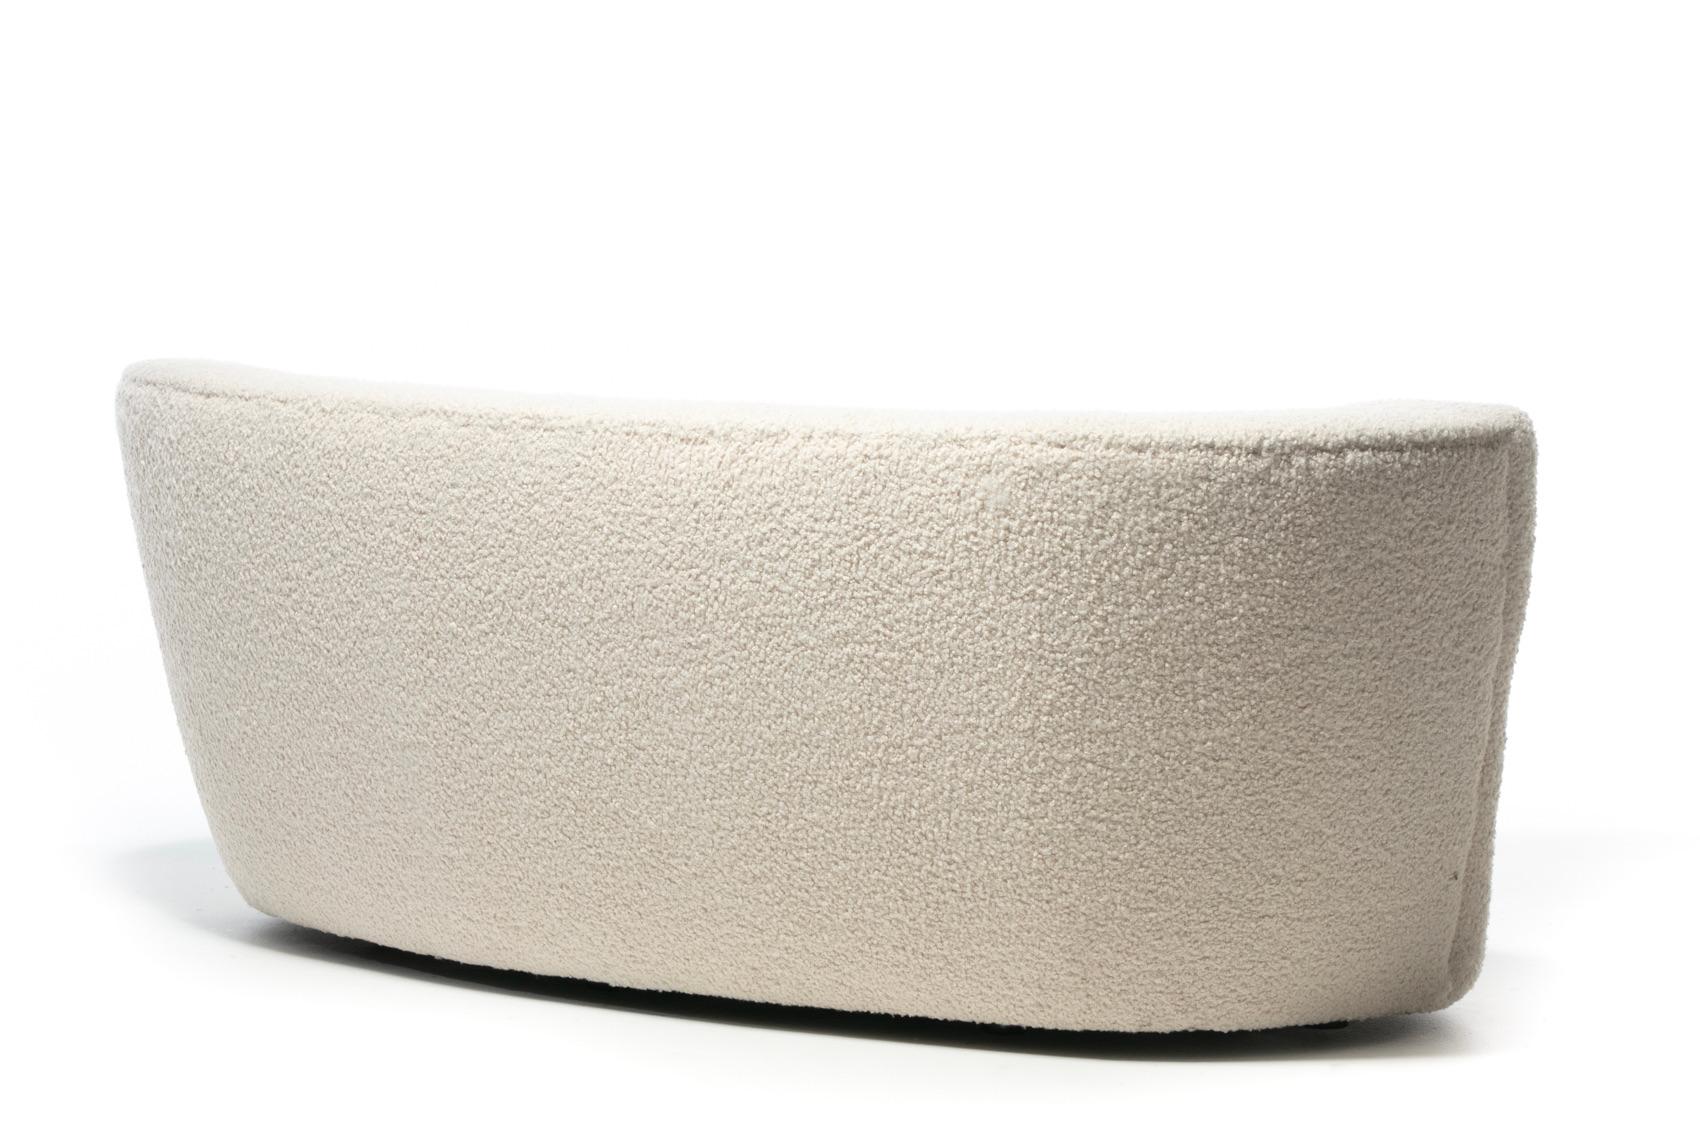 Vladimir Kagan Nautilus Sofa in Ivory White Bouclé by Directional, c. 1990 For Sale 5